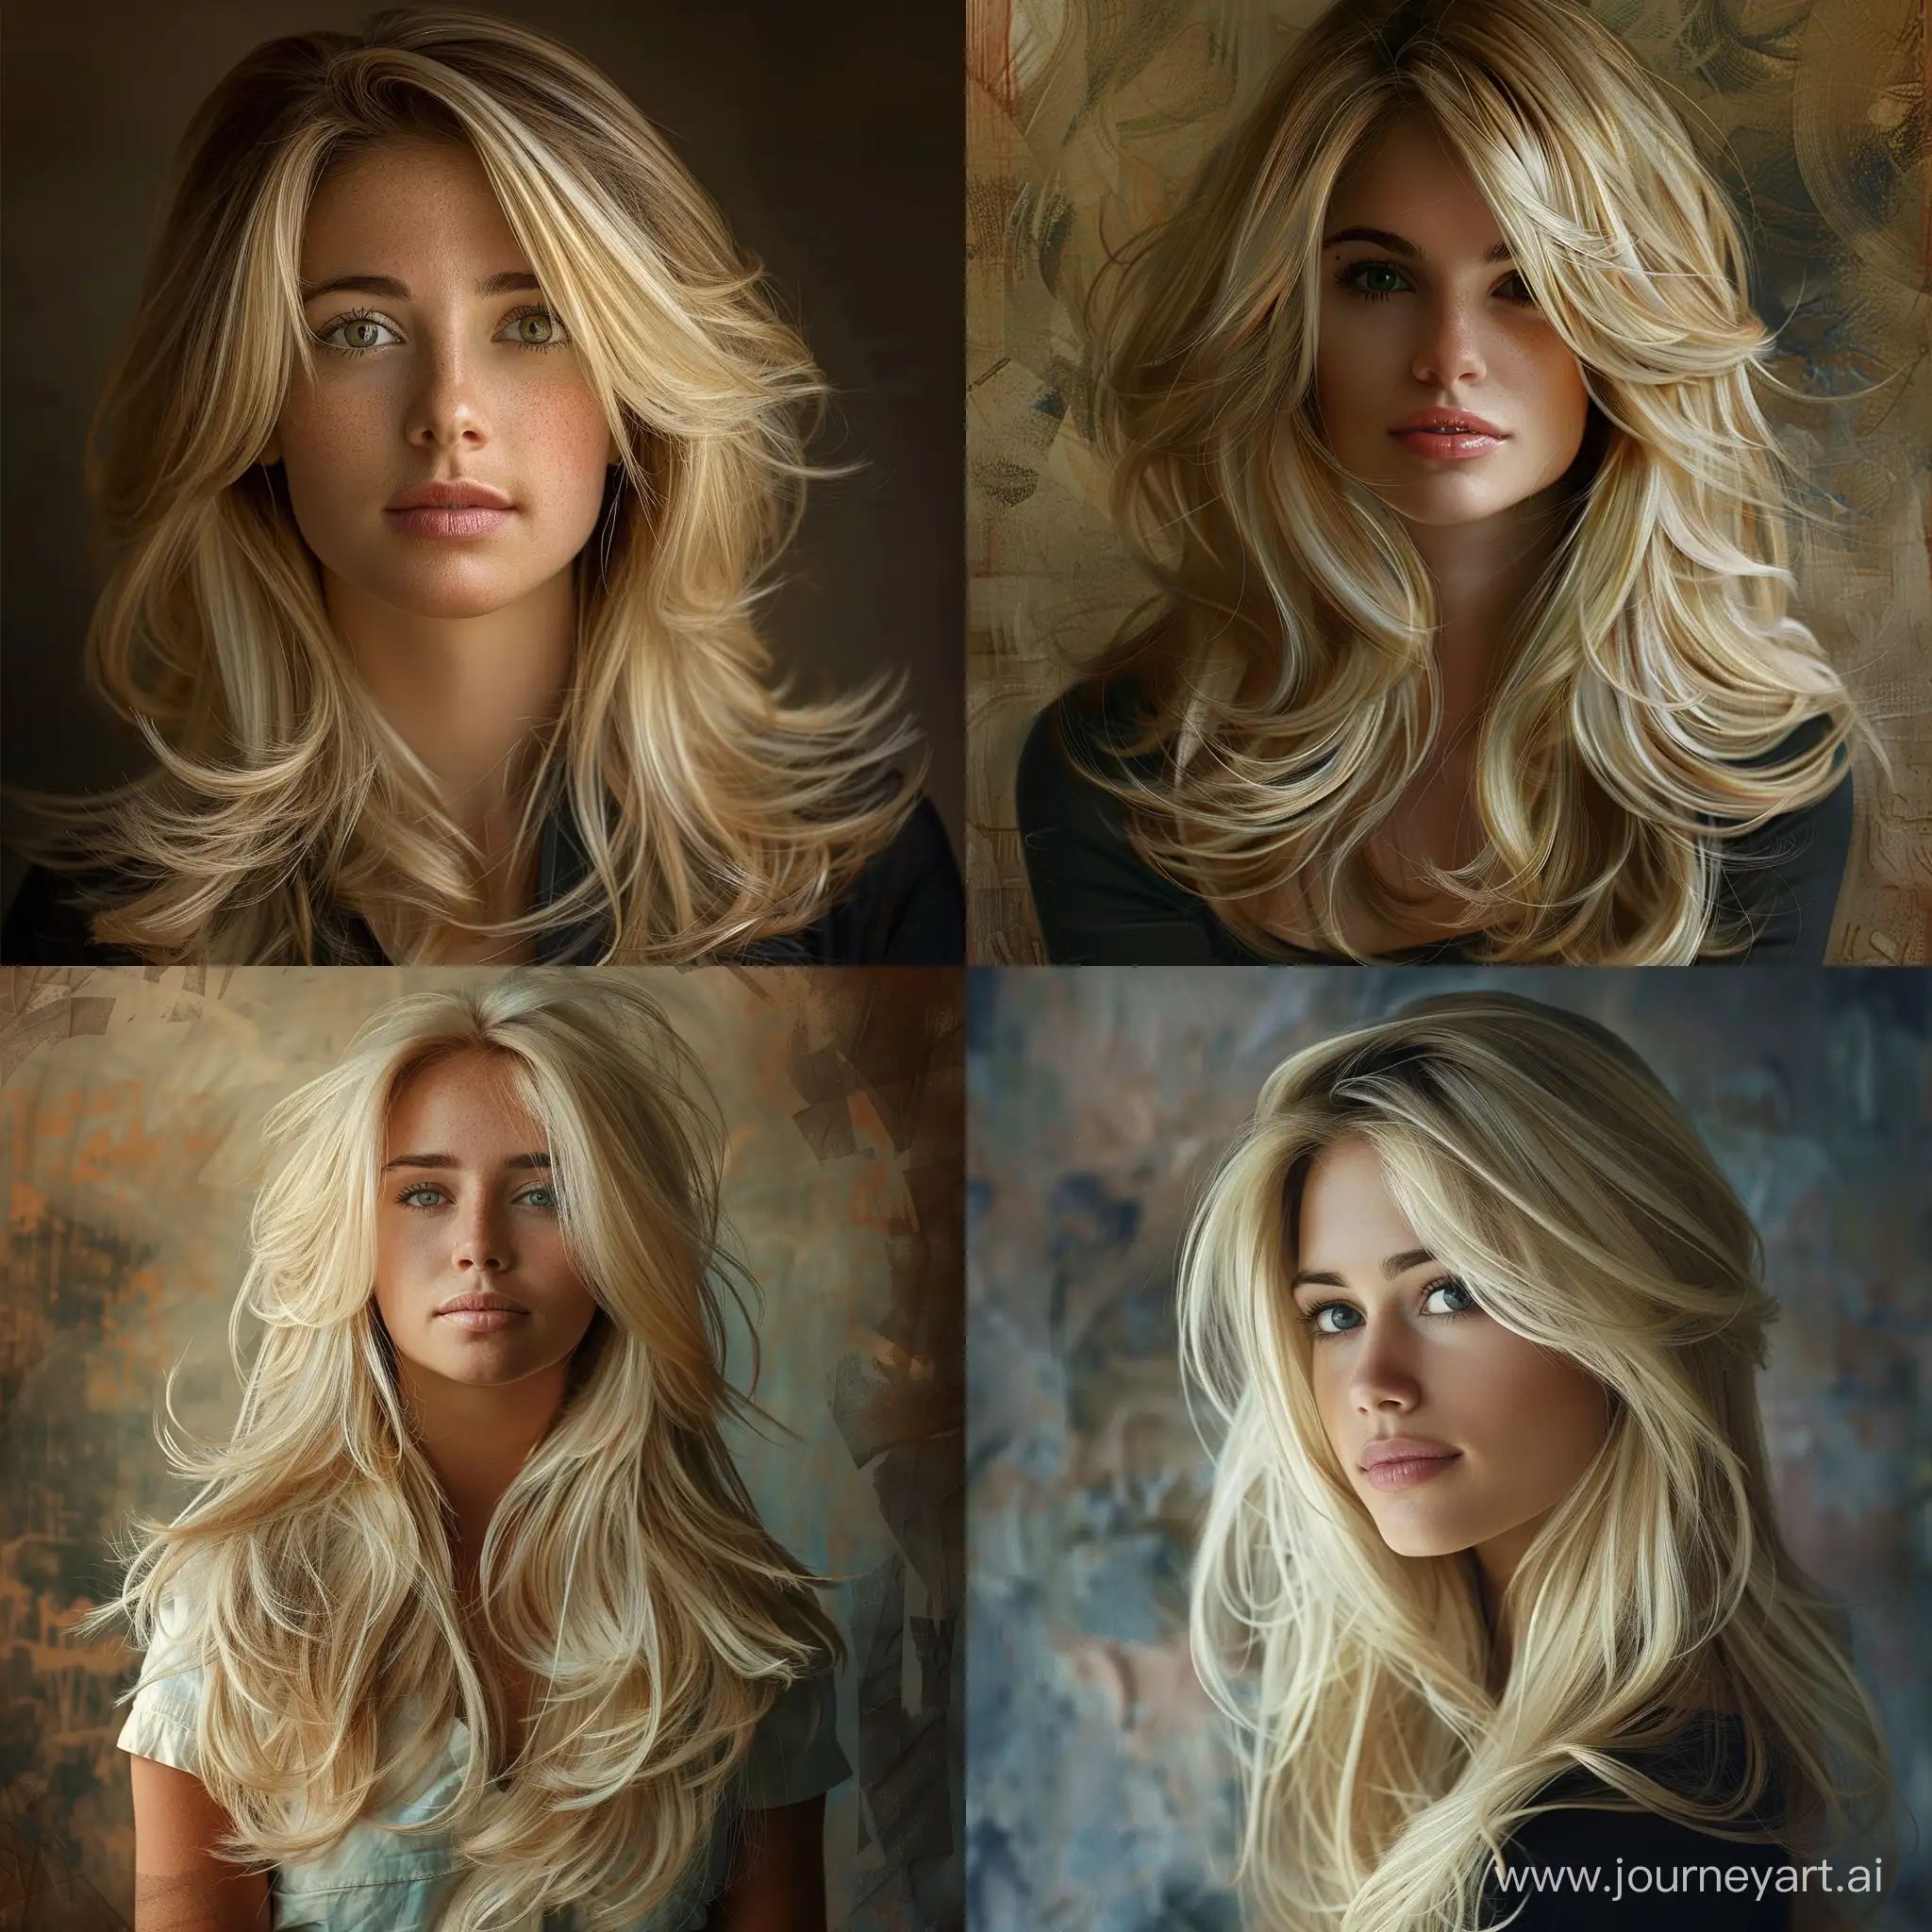 Create a stunning portrait of a woman with blonde hair, showcasing her elegant style and beauty. Pay close attention to the layers of her hair and the overall composition against a contrasting backdrop. Ensure the lighting highlights her features and brings out the vibrancy of her blonde hair. Capture her poised expression and youthful appearance with a sense of confidence and sophistication.